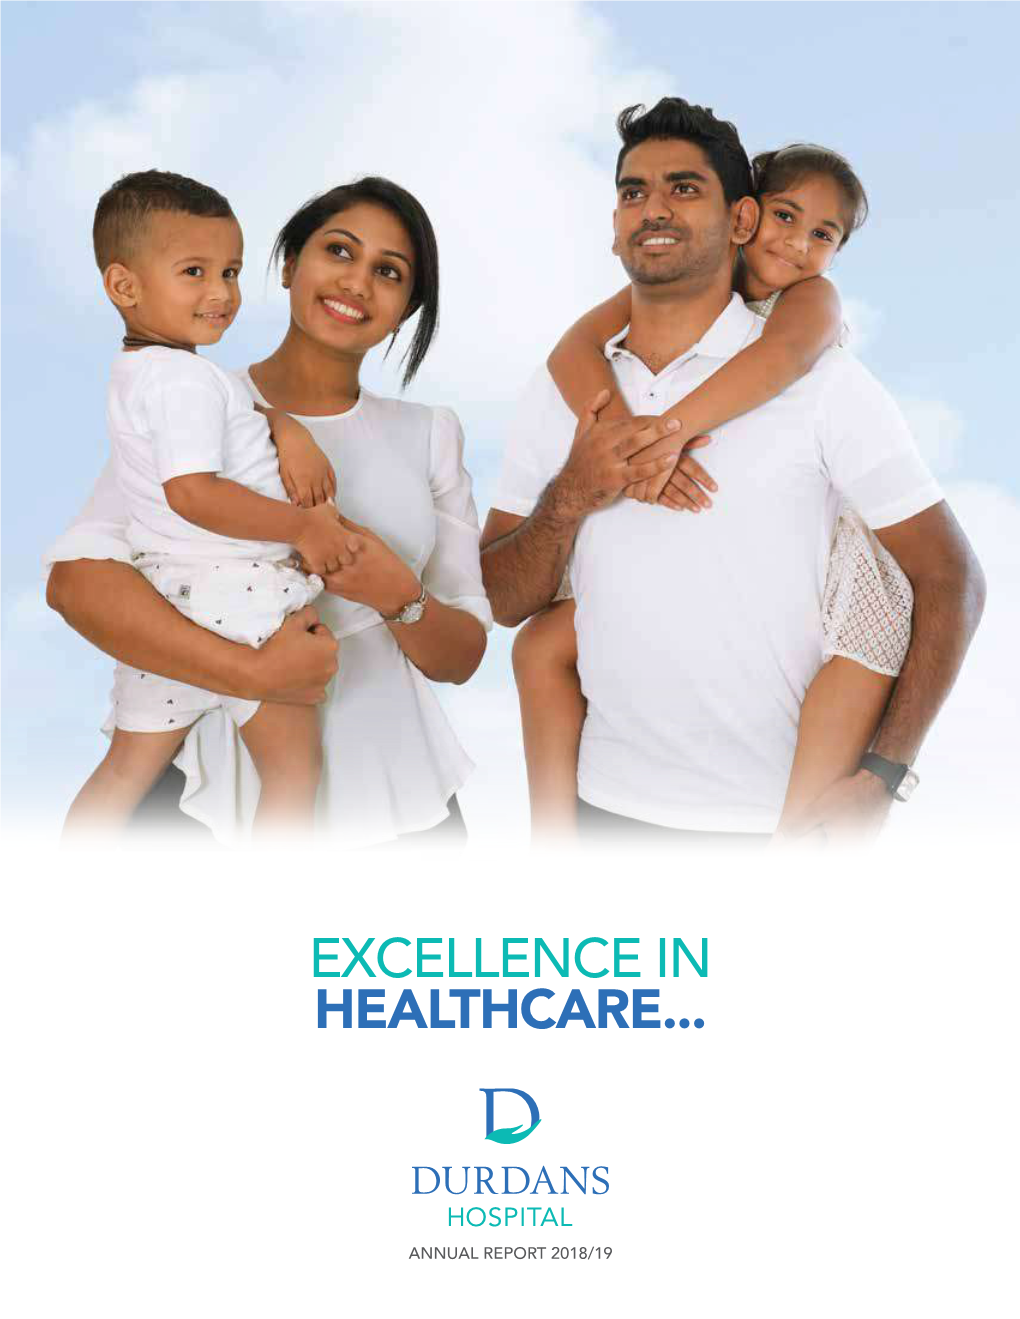 Excellence in Healthcare...For Everyone